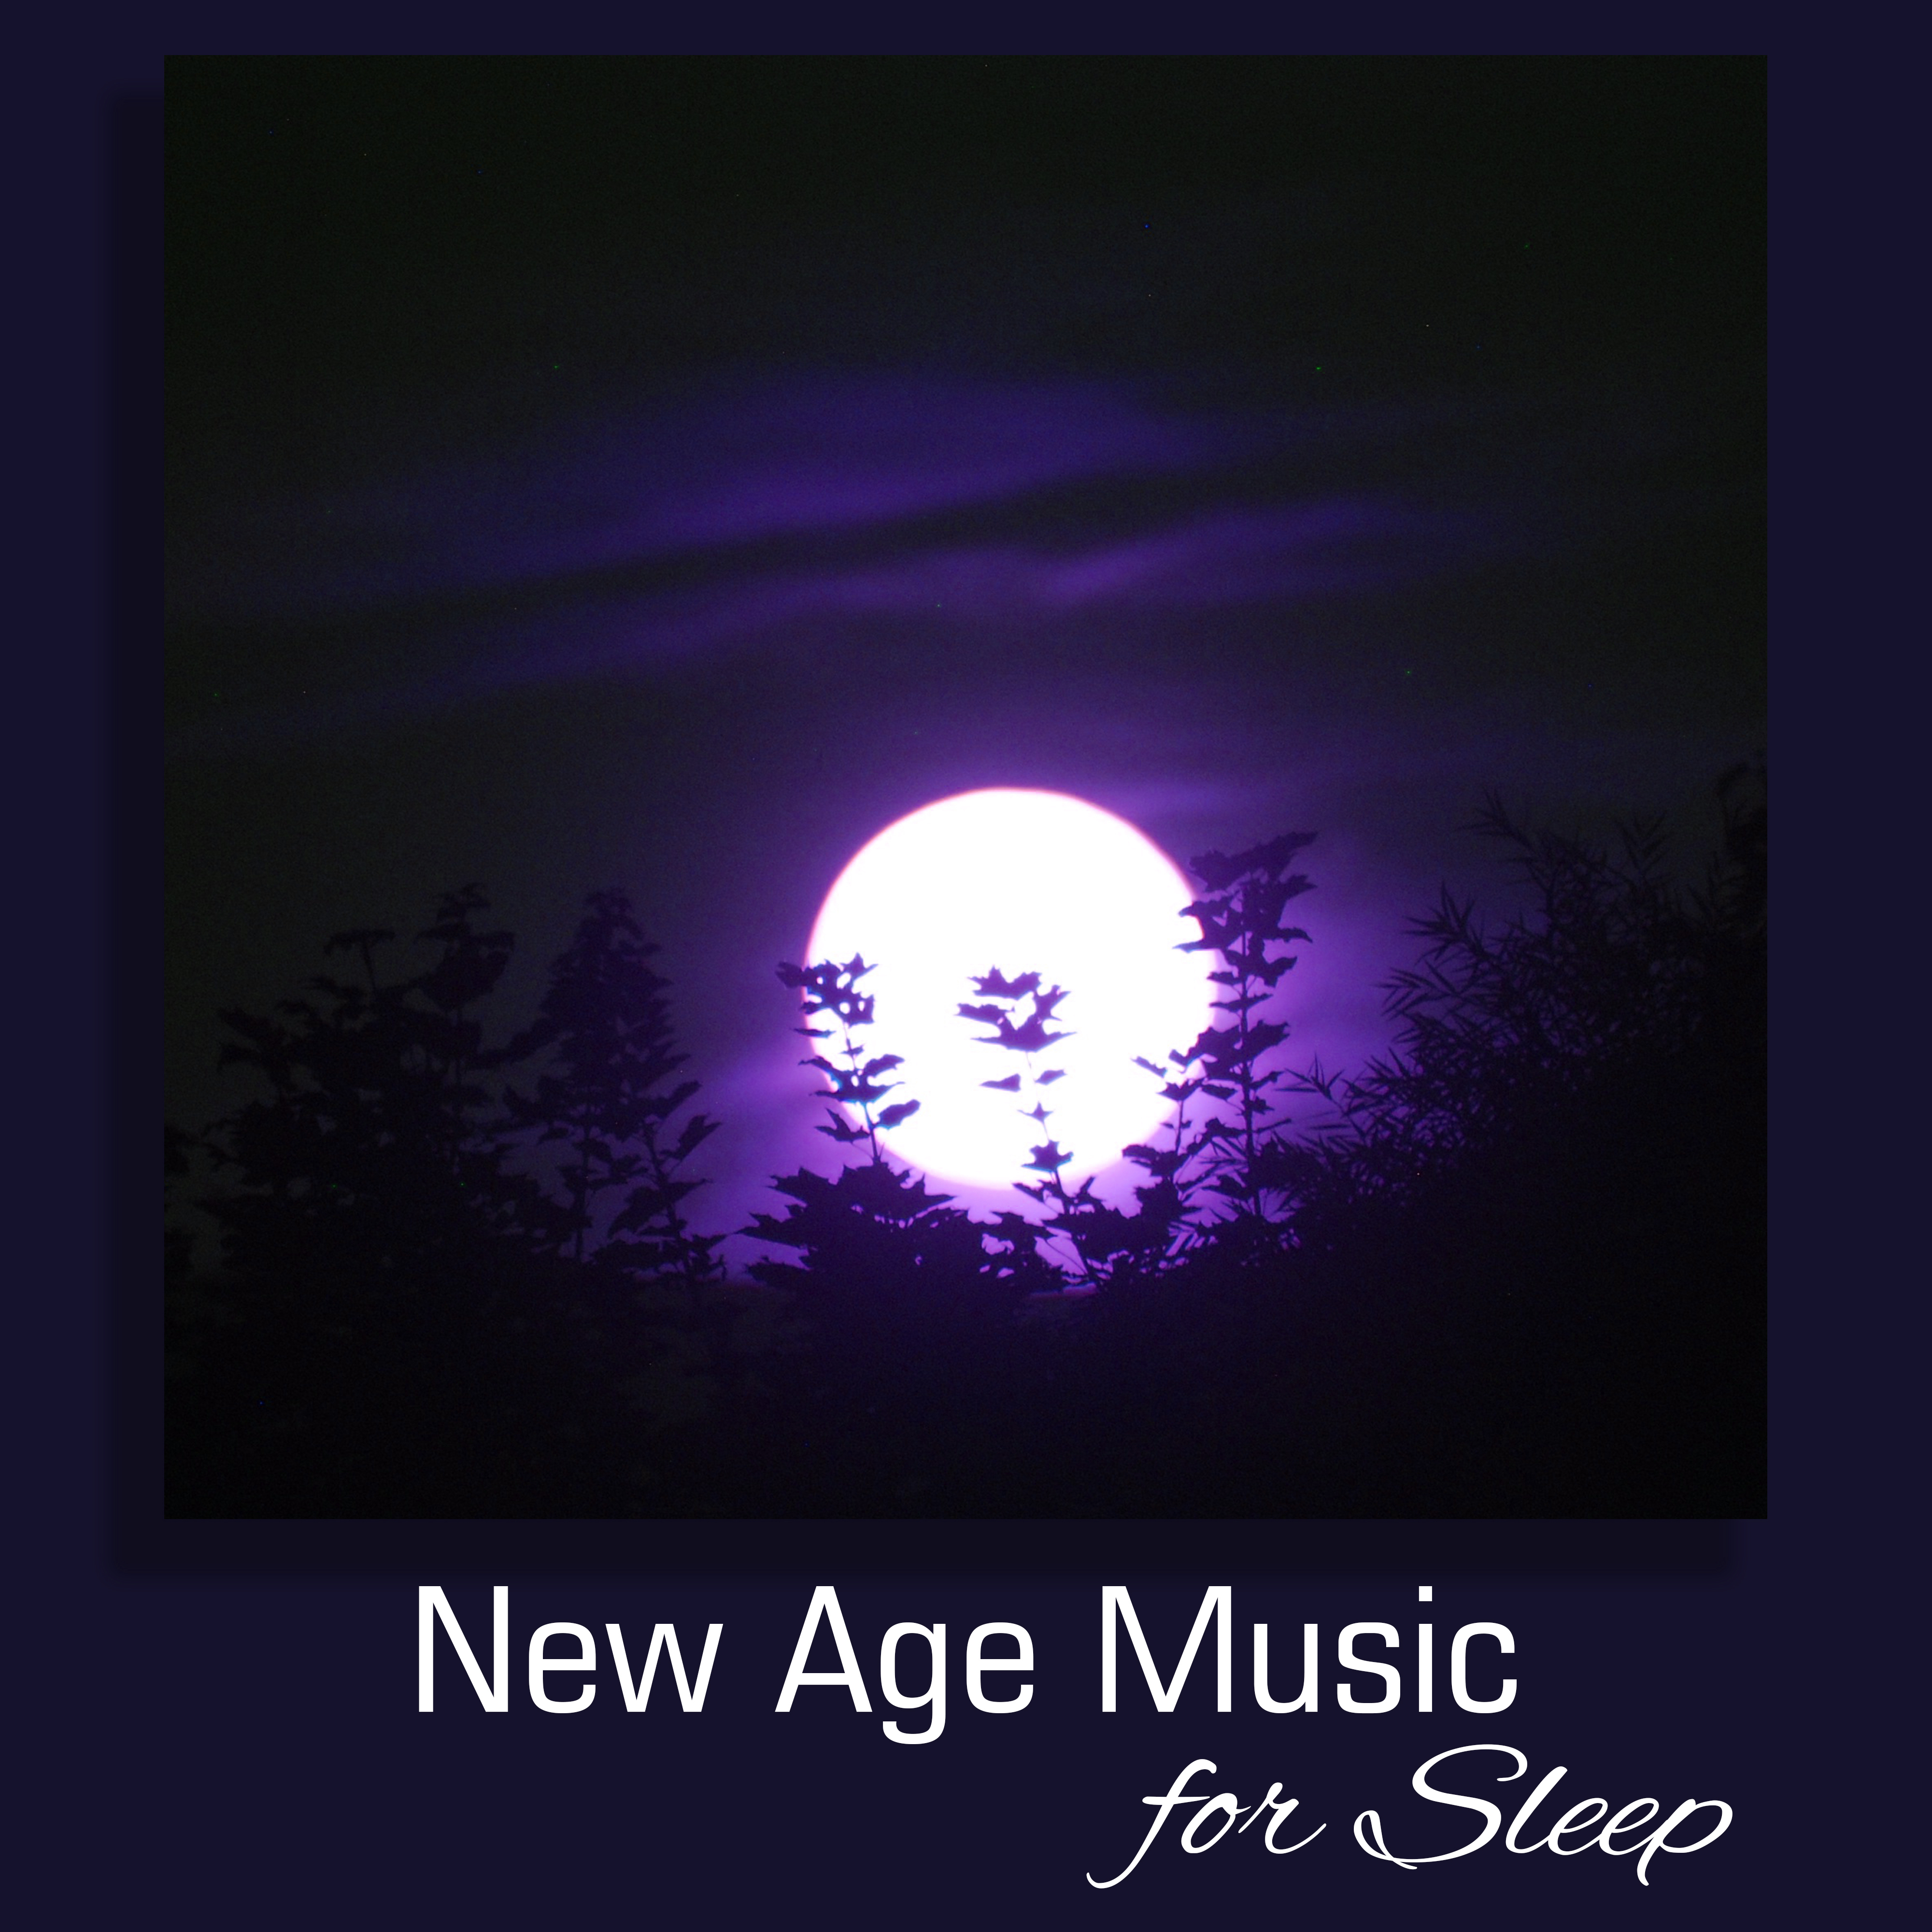 New Age Music for Sleep  Peaceful Lullabies, Pure Sleep, Bedtime, Pure Mind, Calm Down, Stress Free, Nature Sounds for Relief